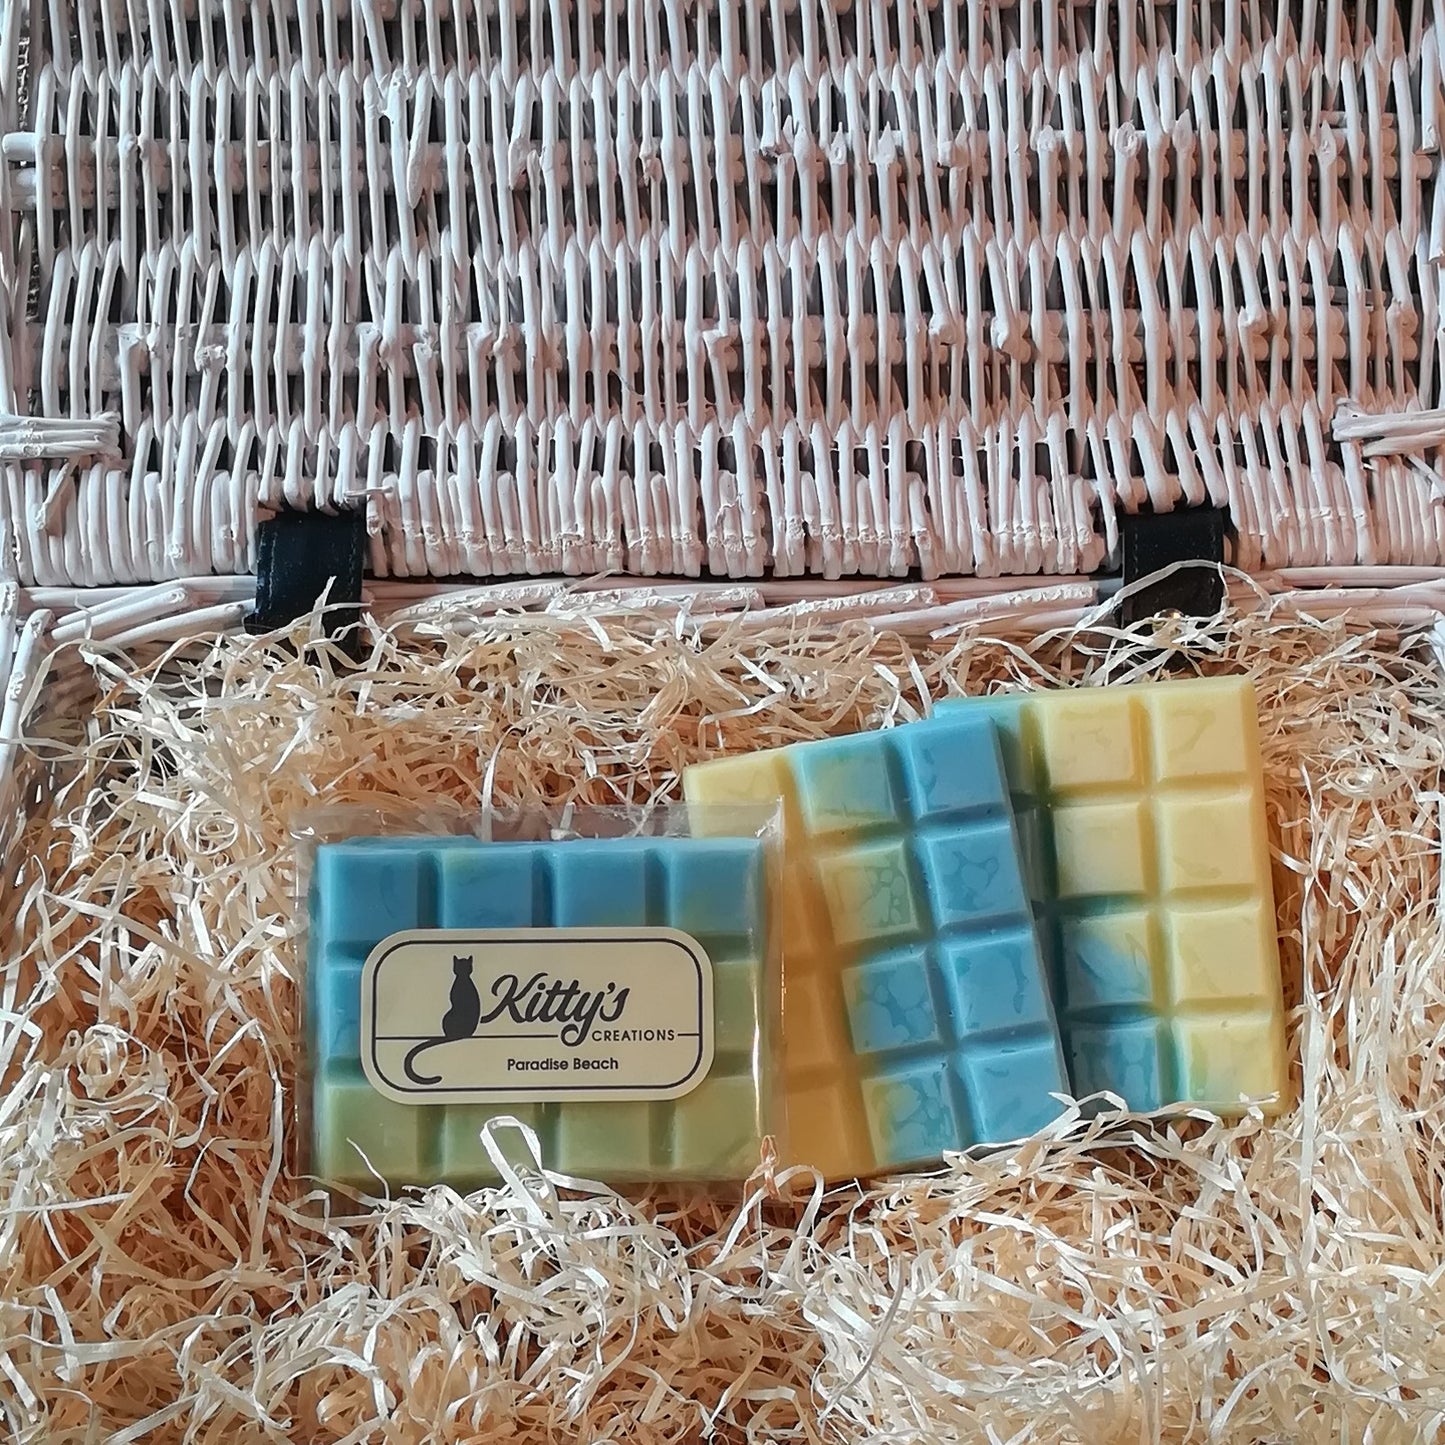 Three hand-made rectangular Wax Melts, each one coloured like a perfect tropical sea lapping over golden yellow sands, resting in a basket of straw. Each melt reveals a scent evoking the memory of warm sunshine caressing your skin as waves gently lap around your ankles.